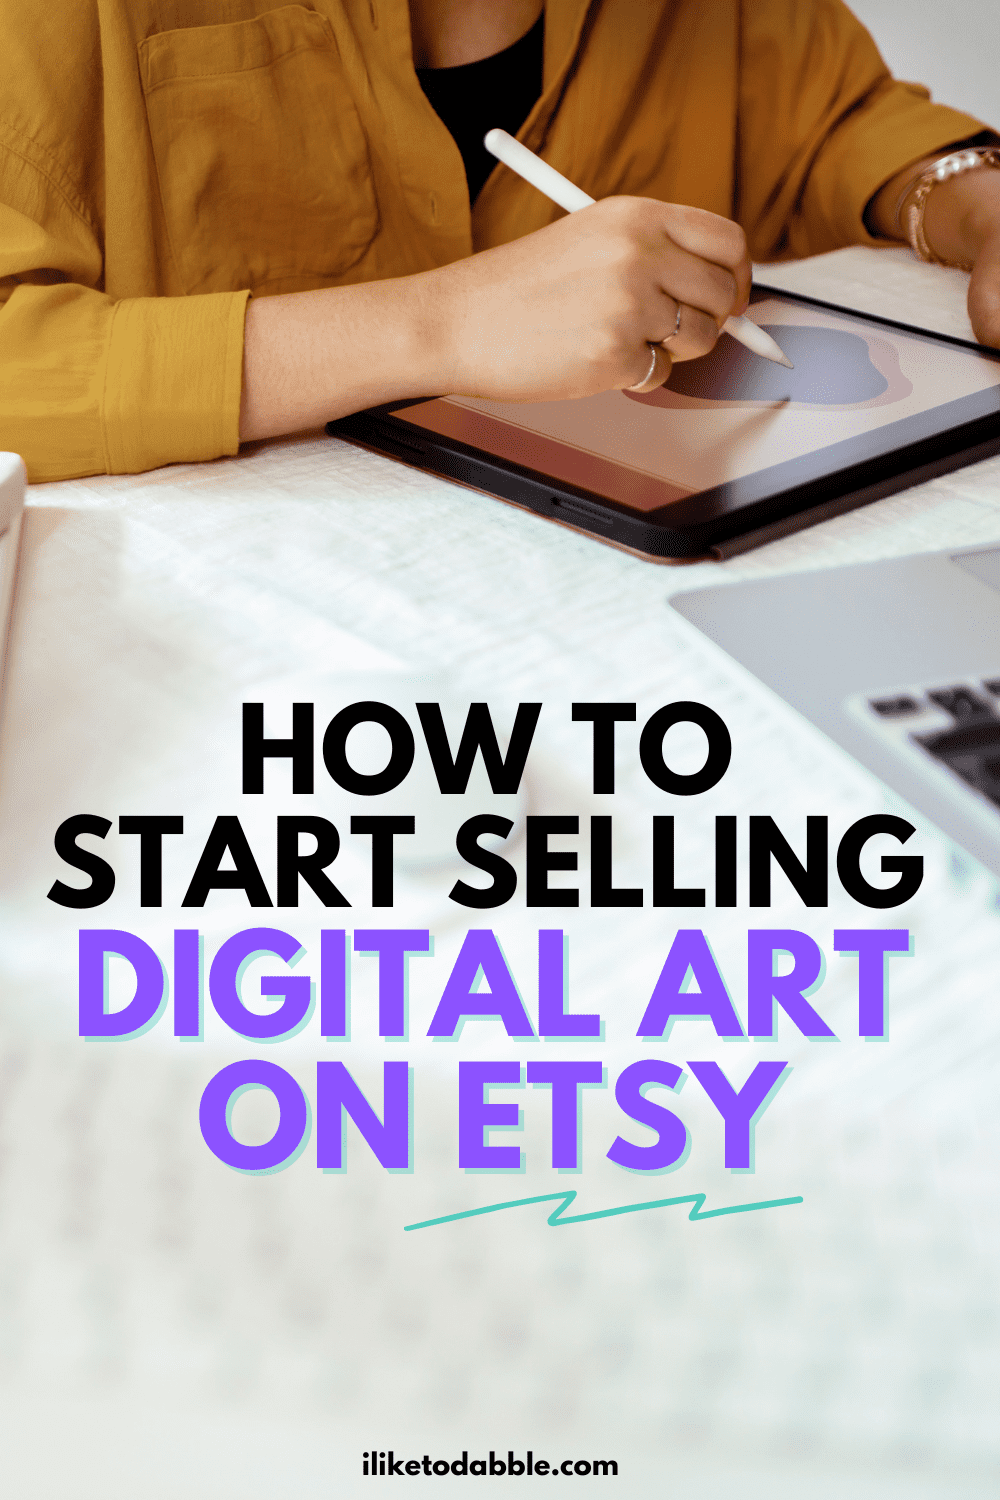 illustrator drawing on a pad with title text overlay that reads: how to start selling digital art on etsy